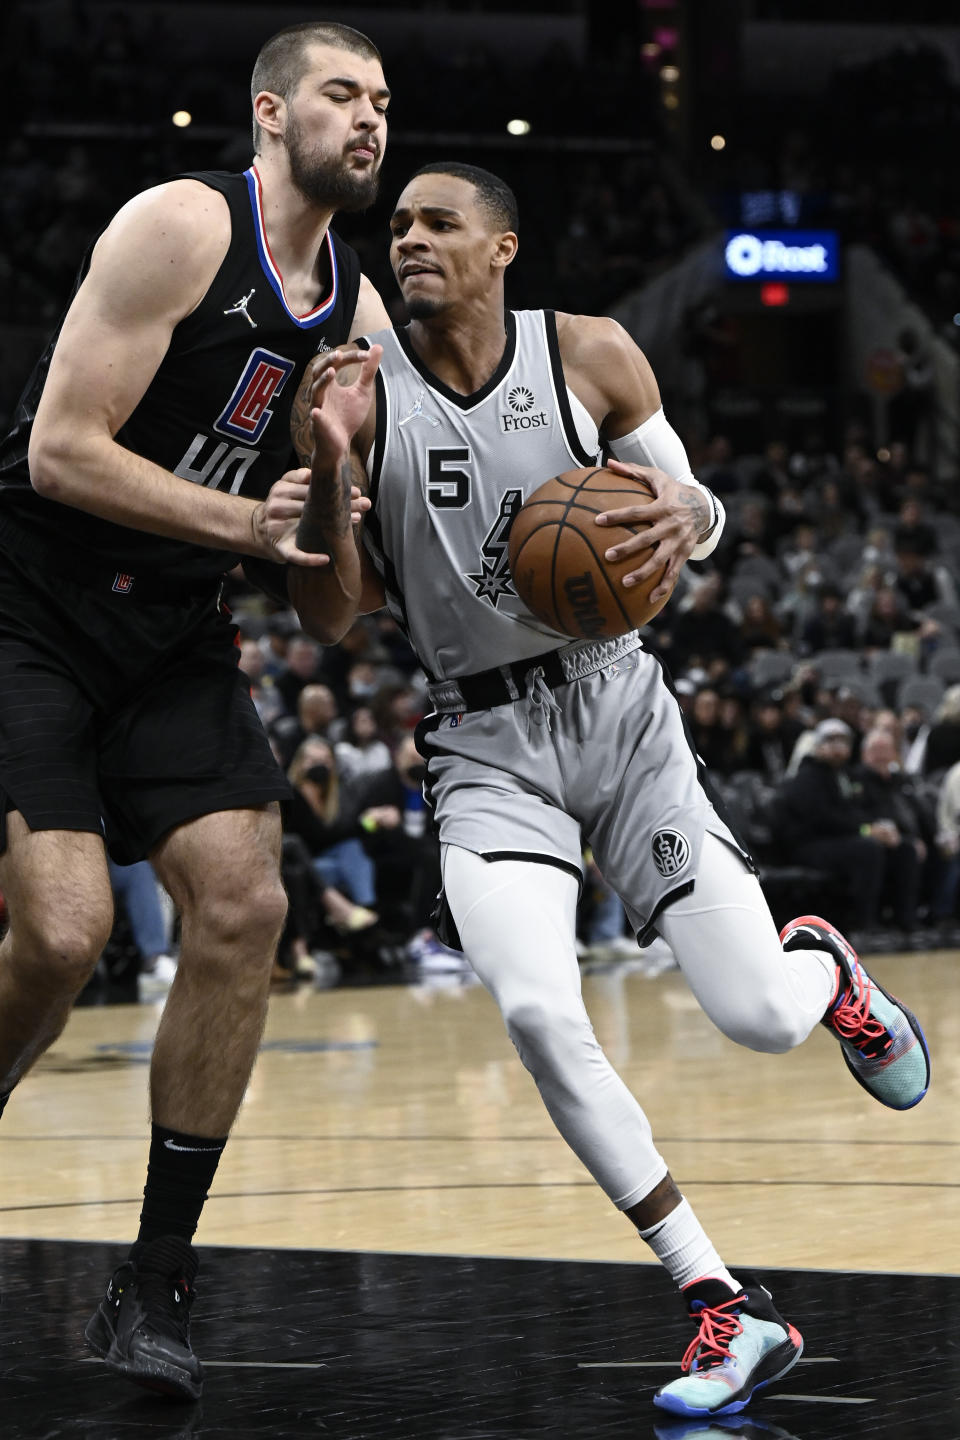 San Antonio Spurs' Dejounte Murray (5) drives against Los Angeles Clippers' Ivica Zubac during the first half of an NBA basketball game, Saturday, Jan. 15, 2022, in San Antonio. (AP Photo/Darren Abate)